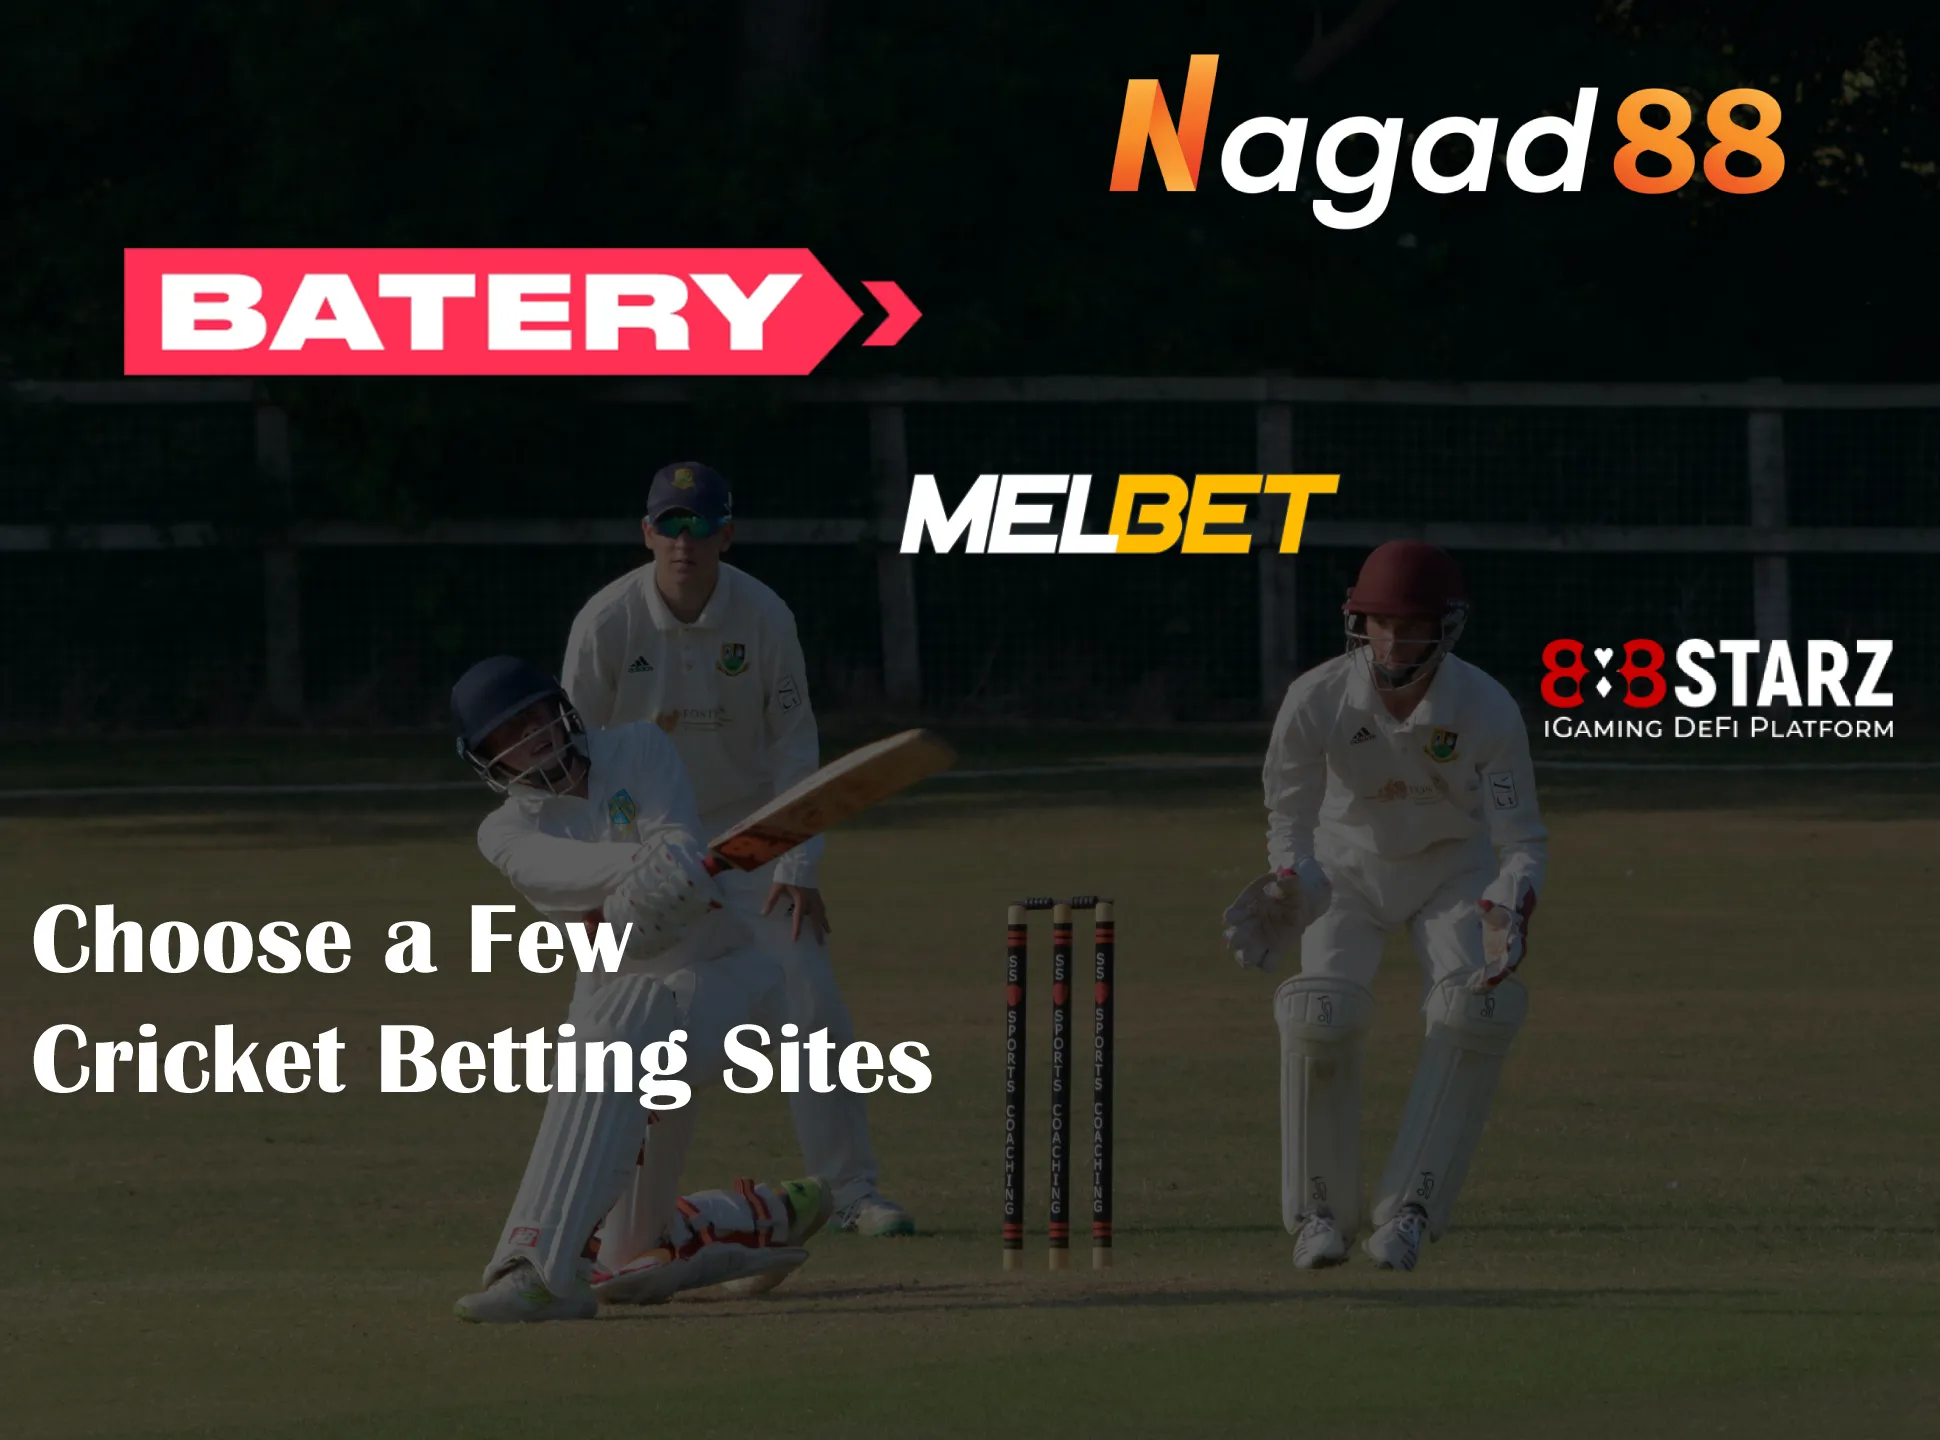 Compare the sites in our review and choose your favourite for cricket betting.